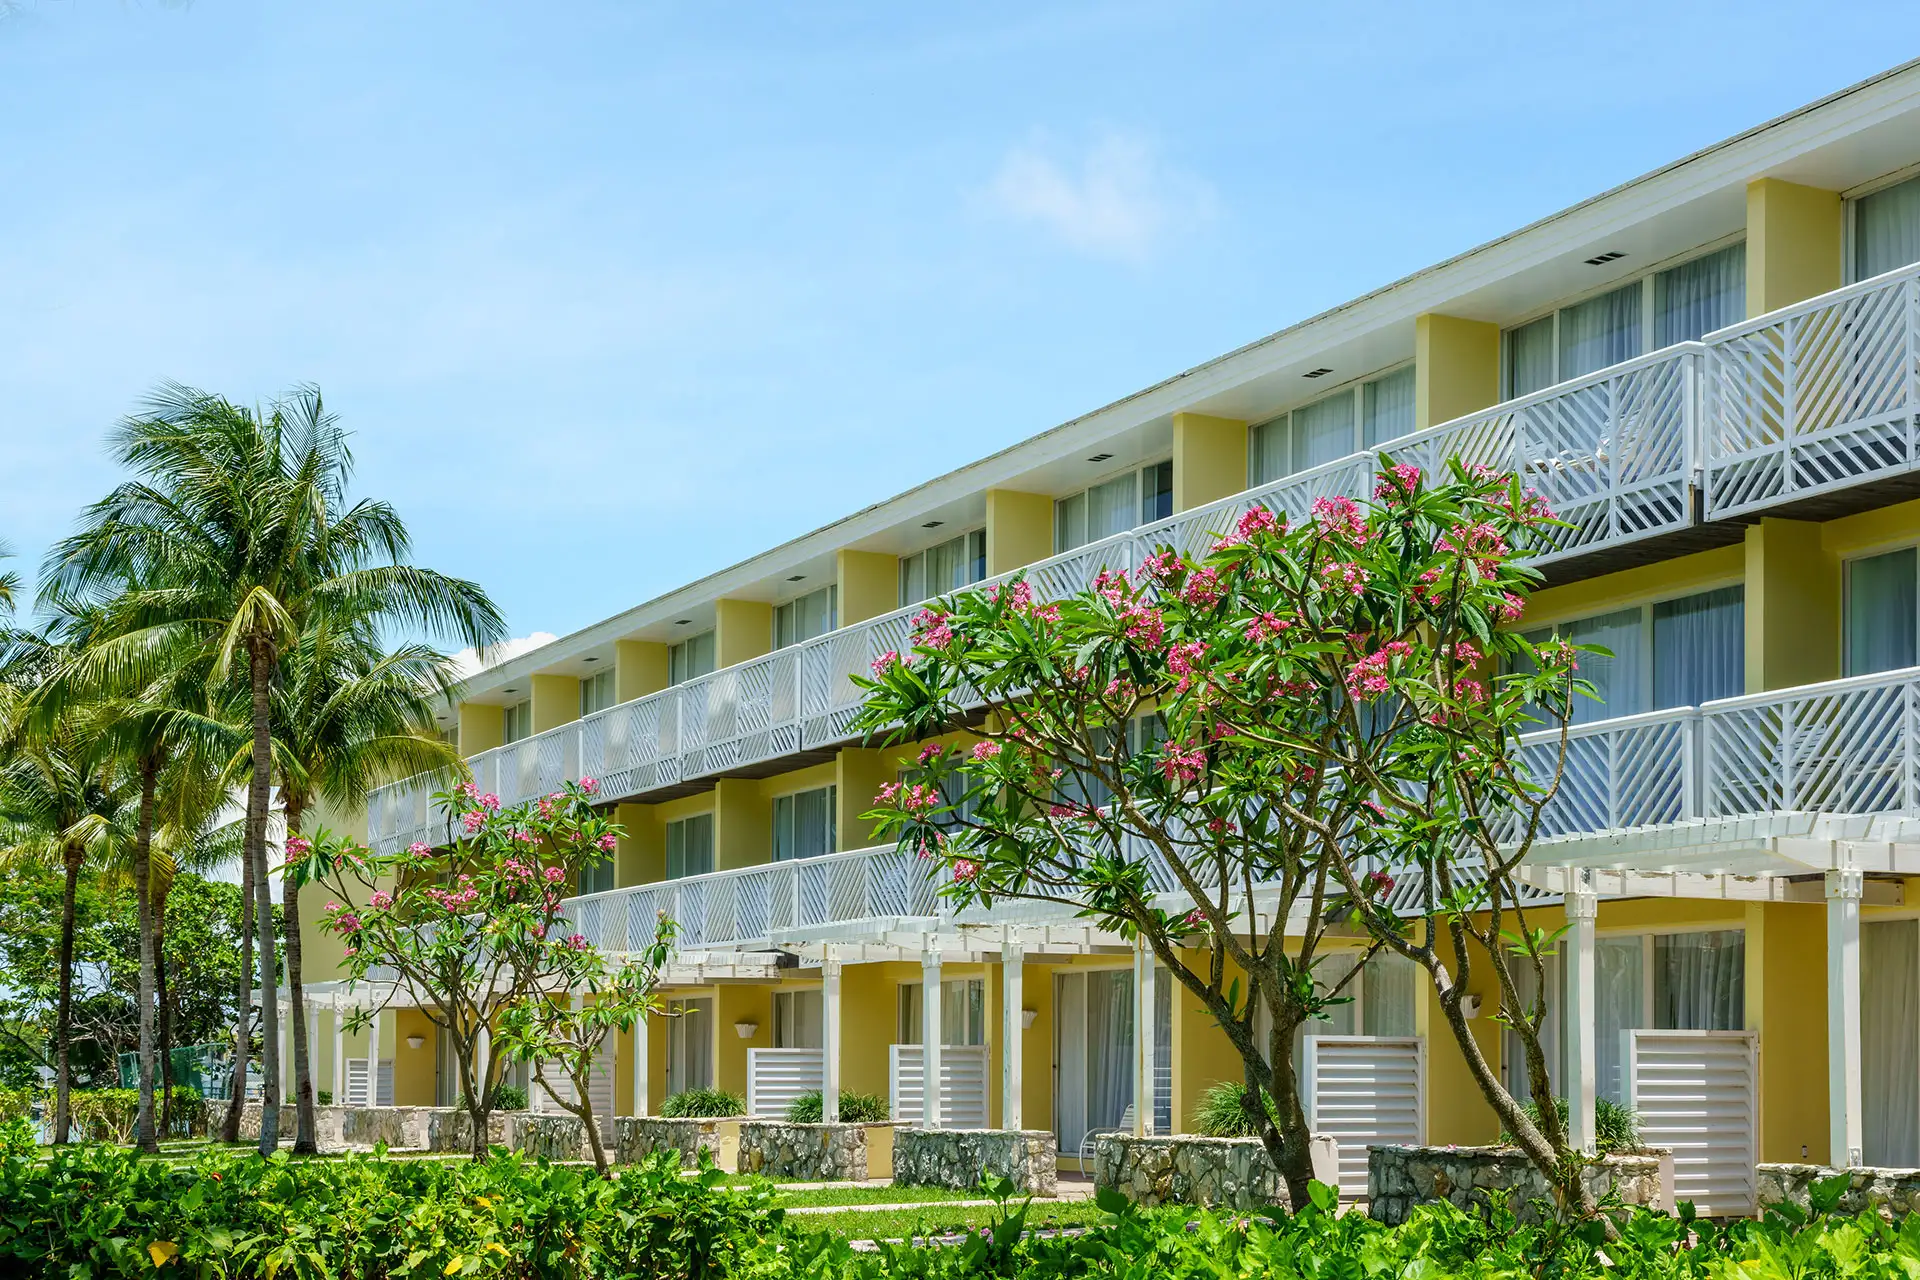 Lighthouse Pointe at Grand Lucayan; Courtesy of Lighthouse Pointe at Grand Lucayan